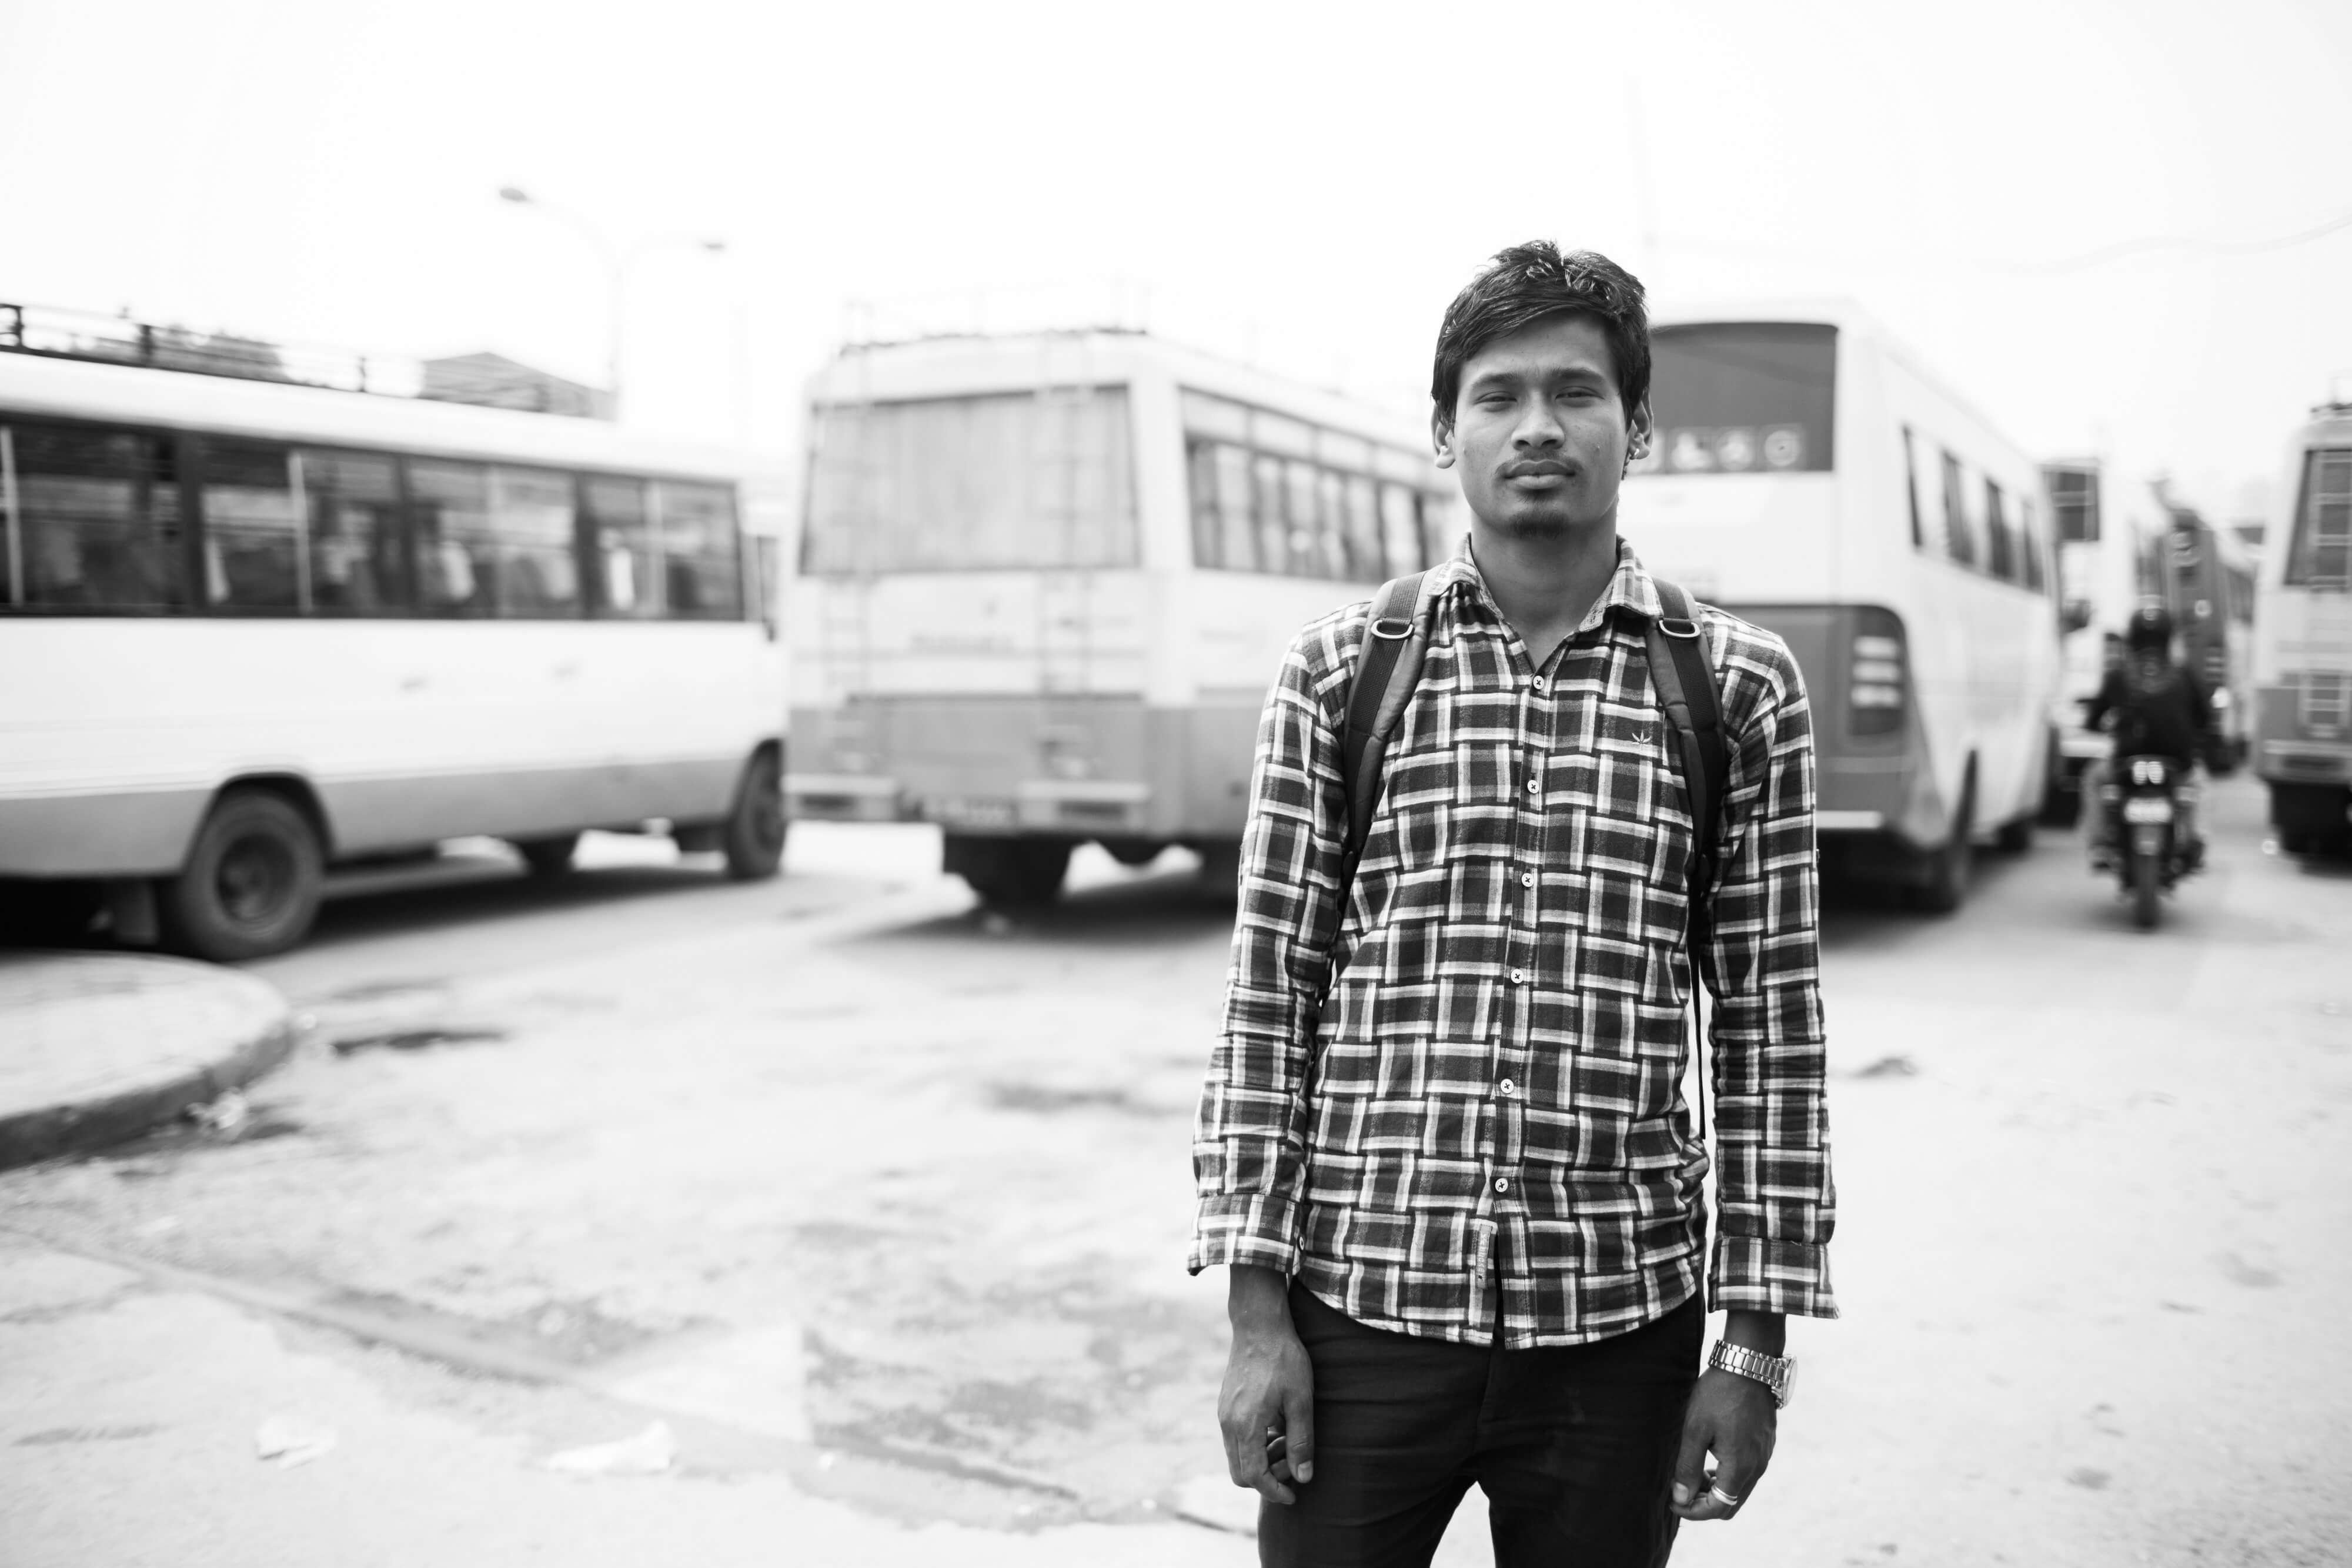 South Asian Love Justice monitor at bus station